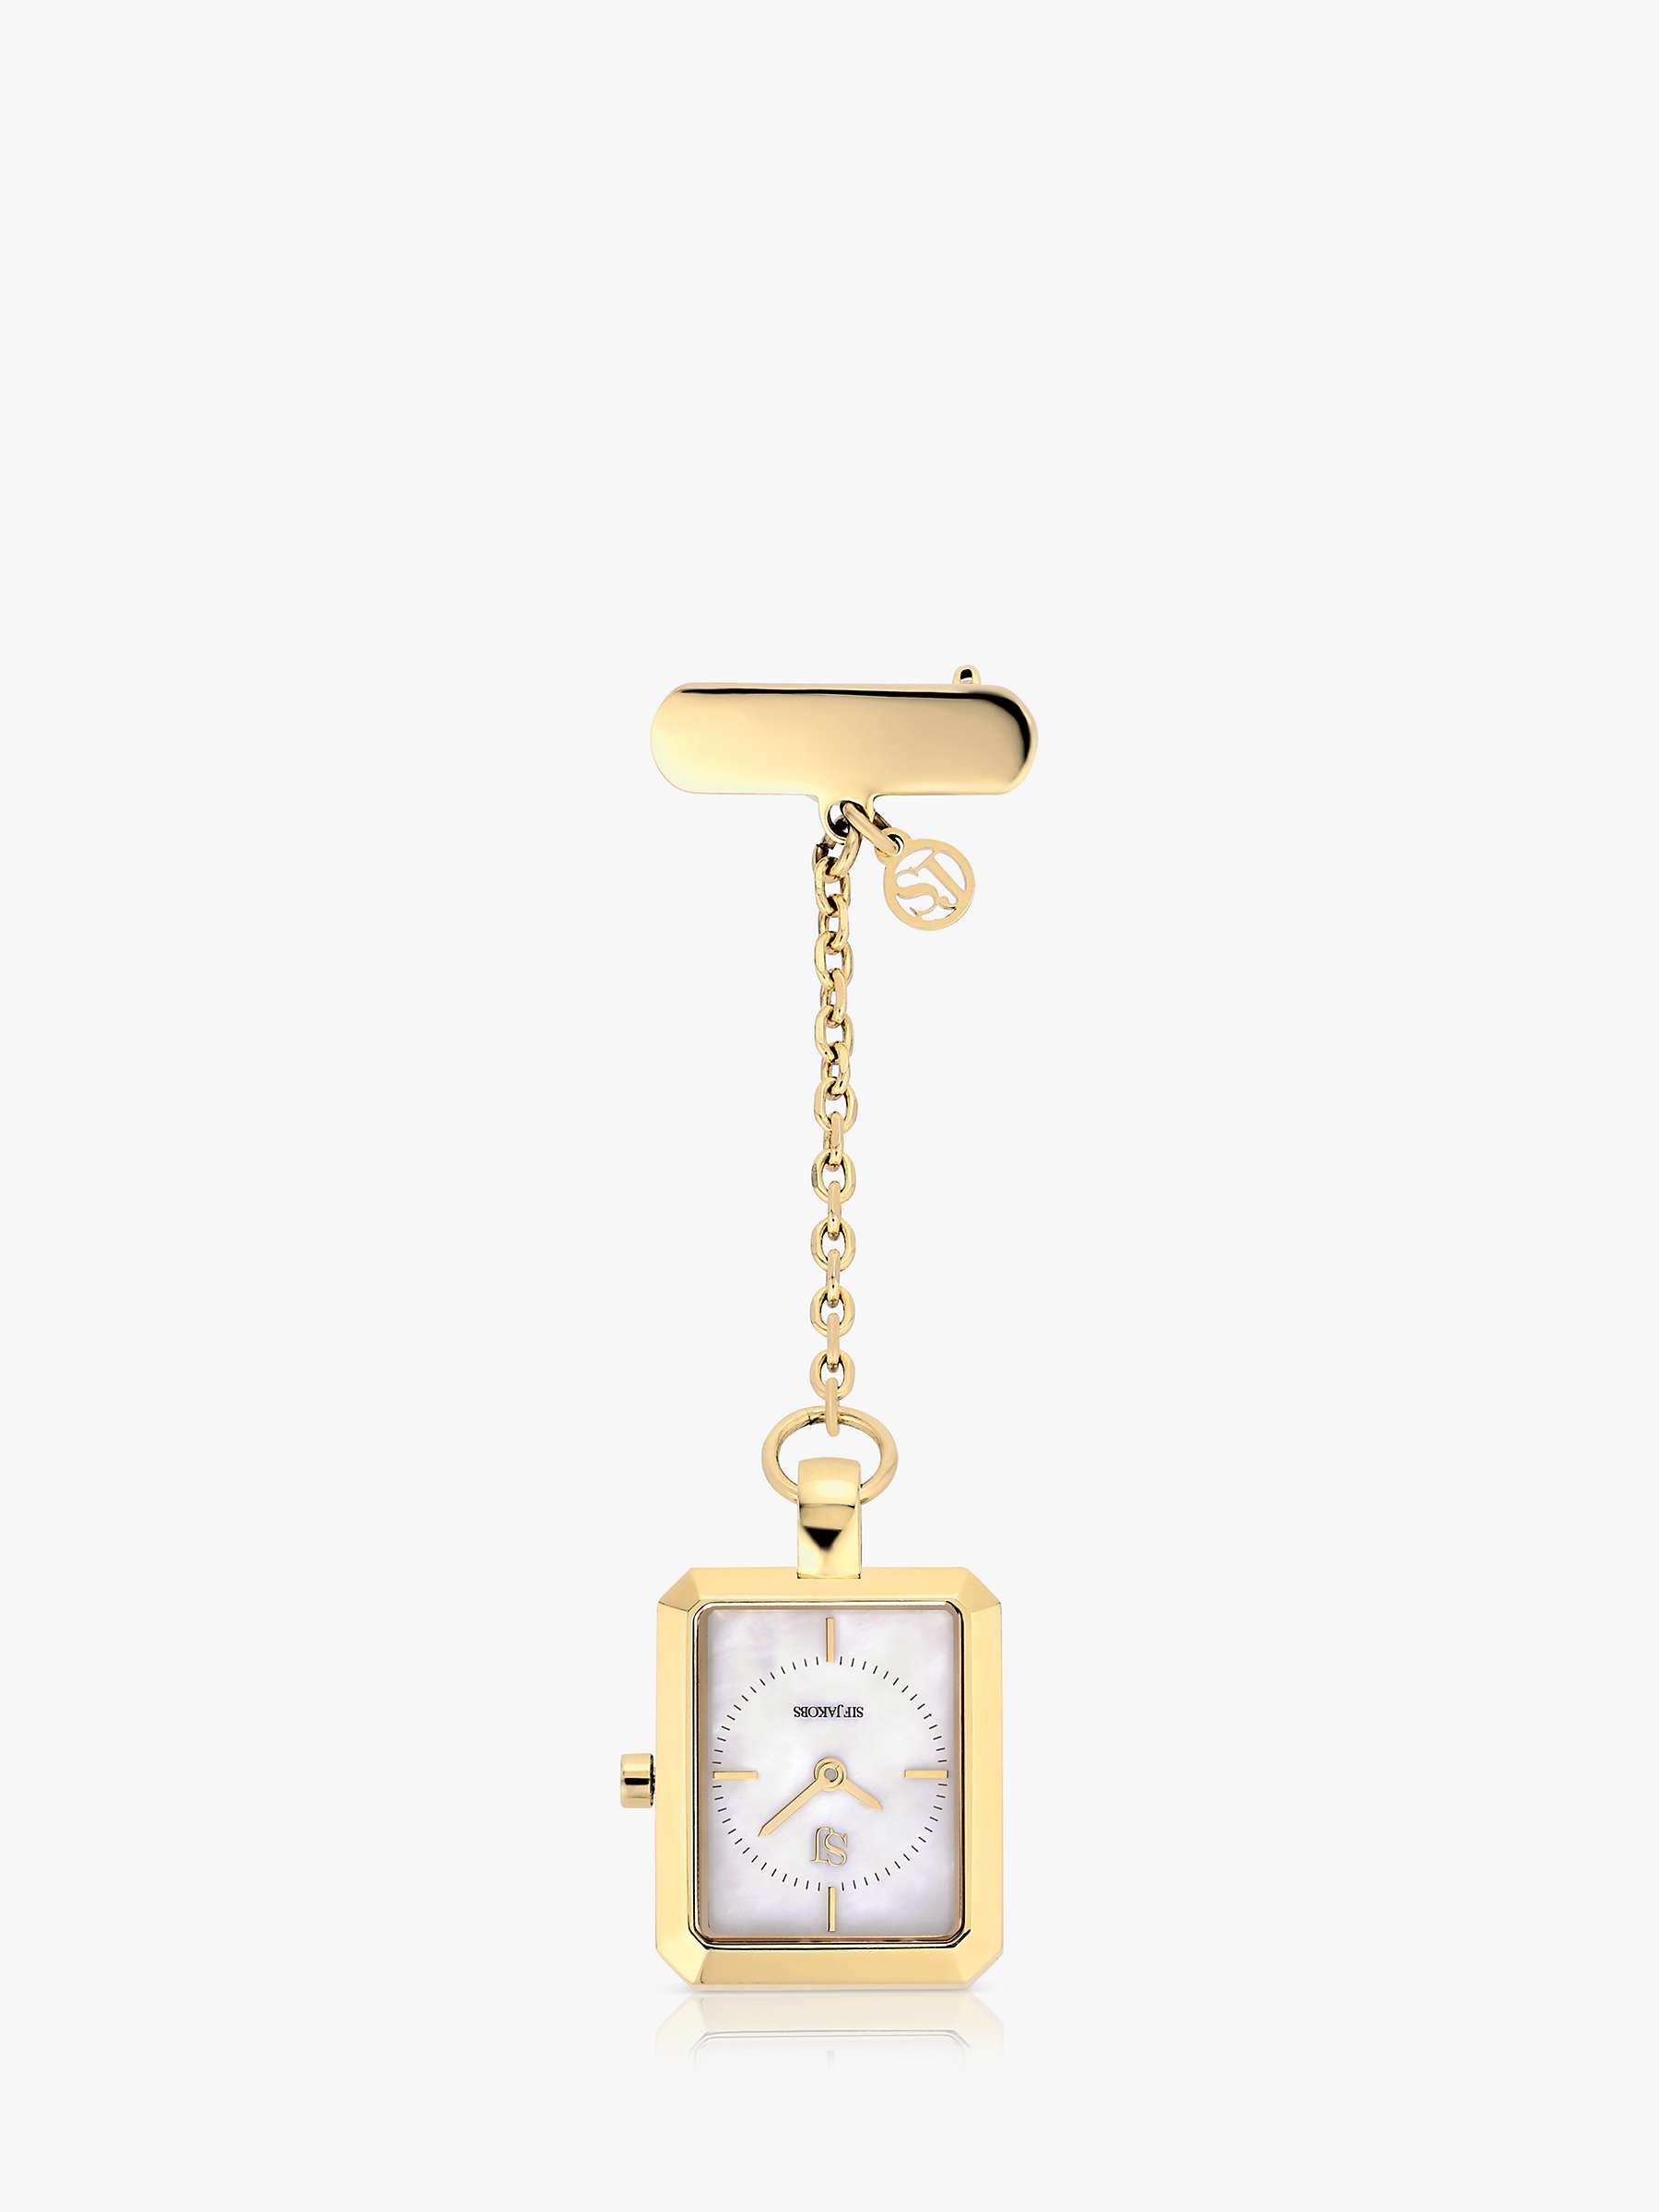 Buy Sif Jakobs Jewellery Francesca Mother Of Pearl Dial Pocket Watch, Gold Plated Online at johnlewis.com